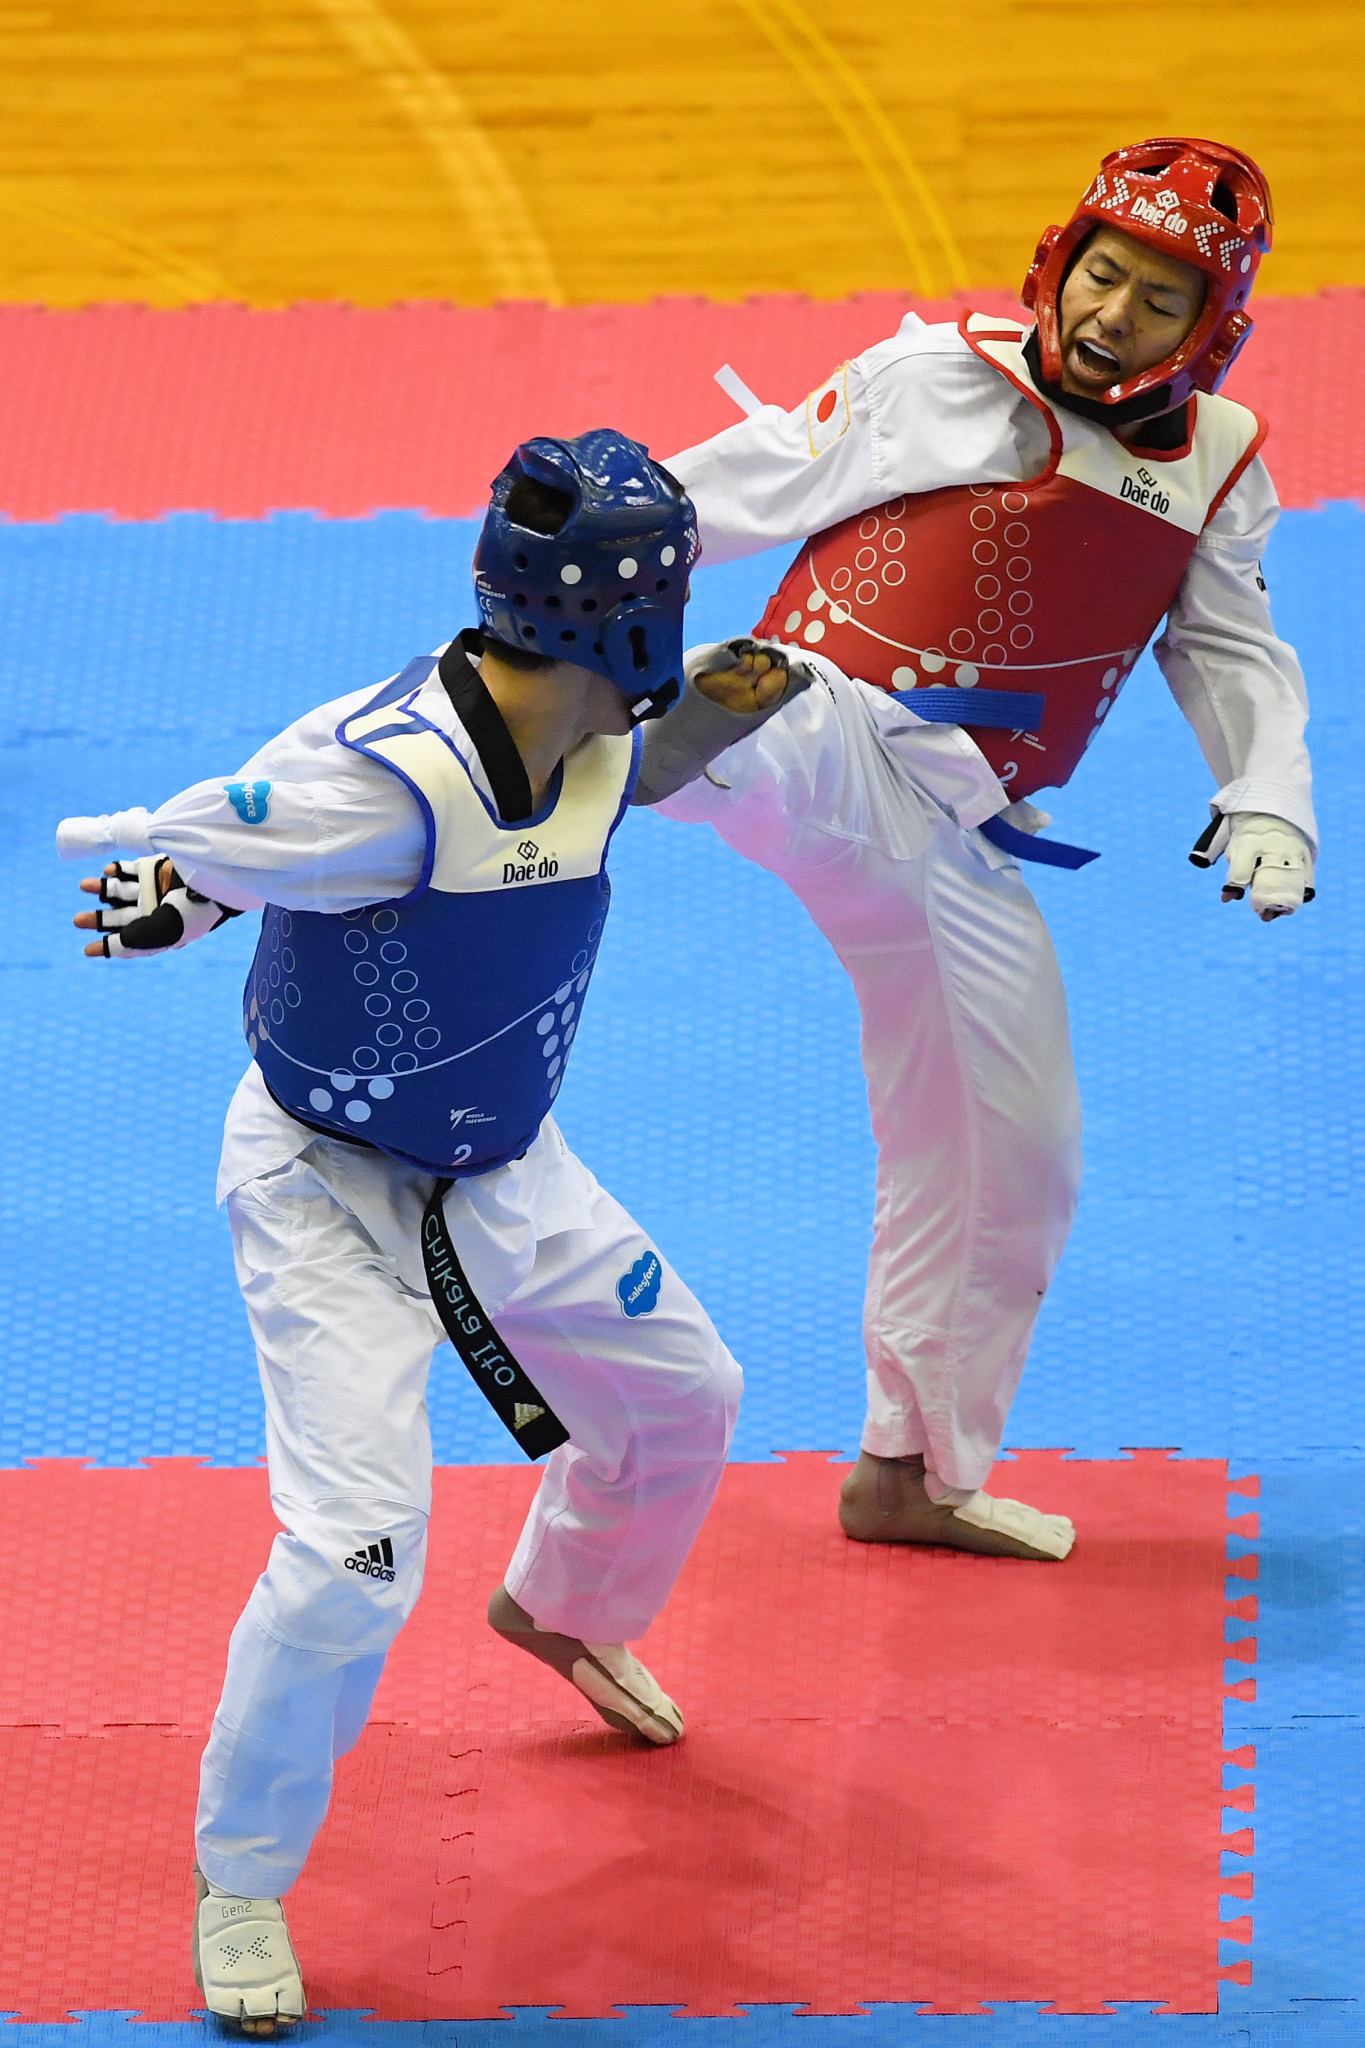 Taekwondo has had to adapt to online competition during the COVID-19 pandemic ©Getty Images